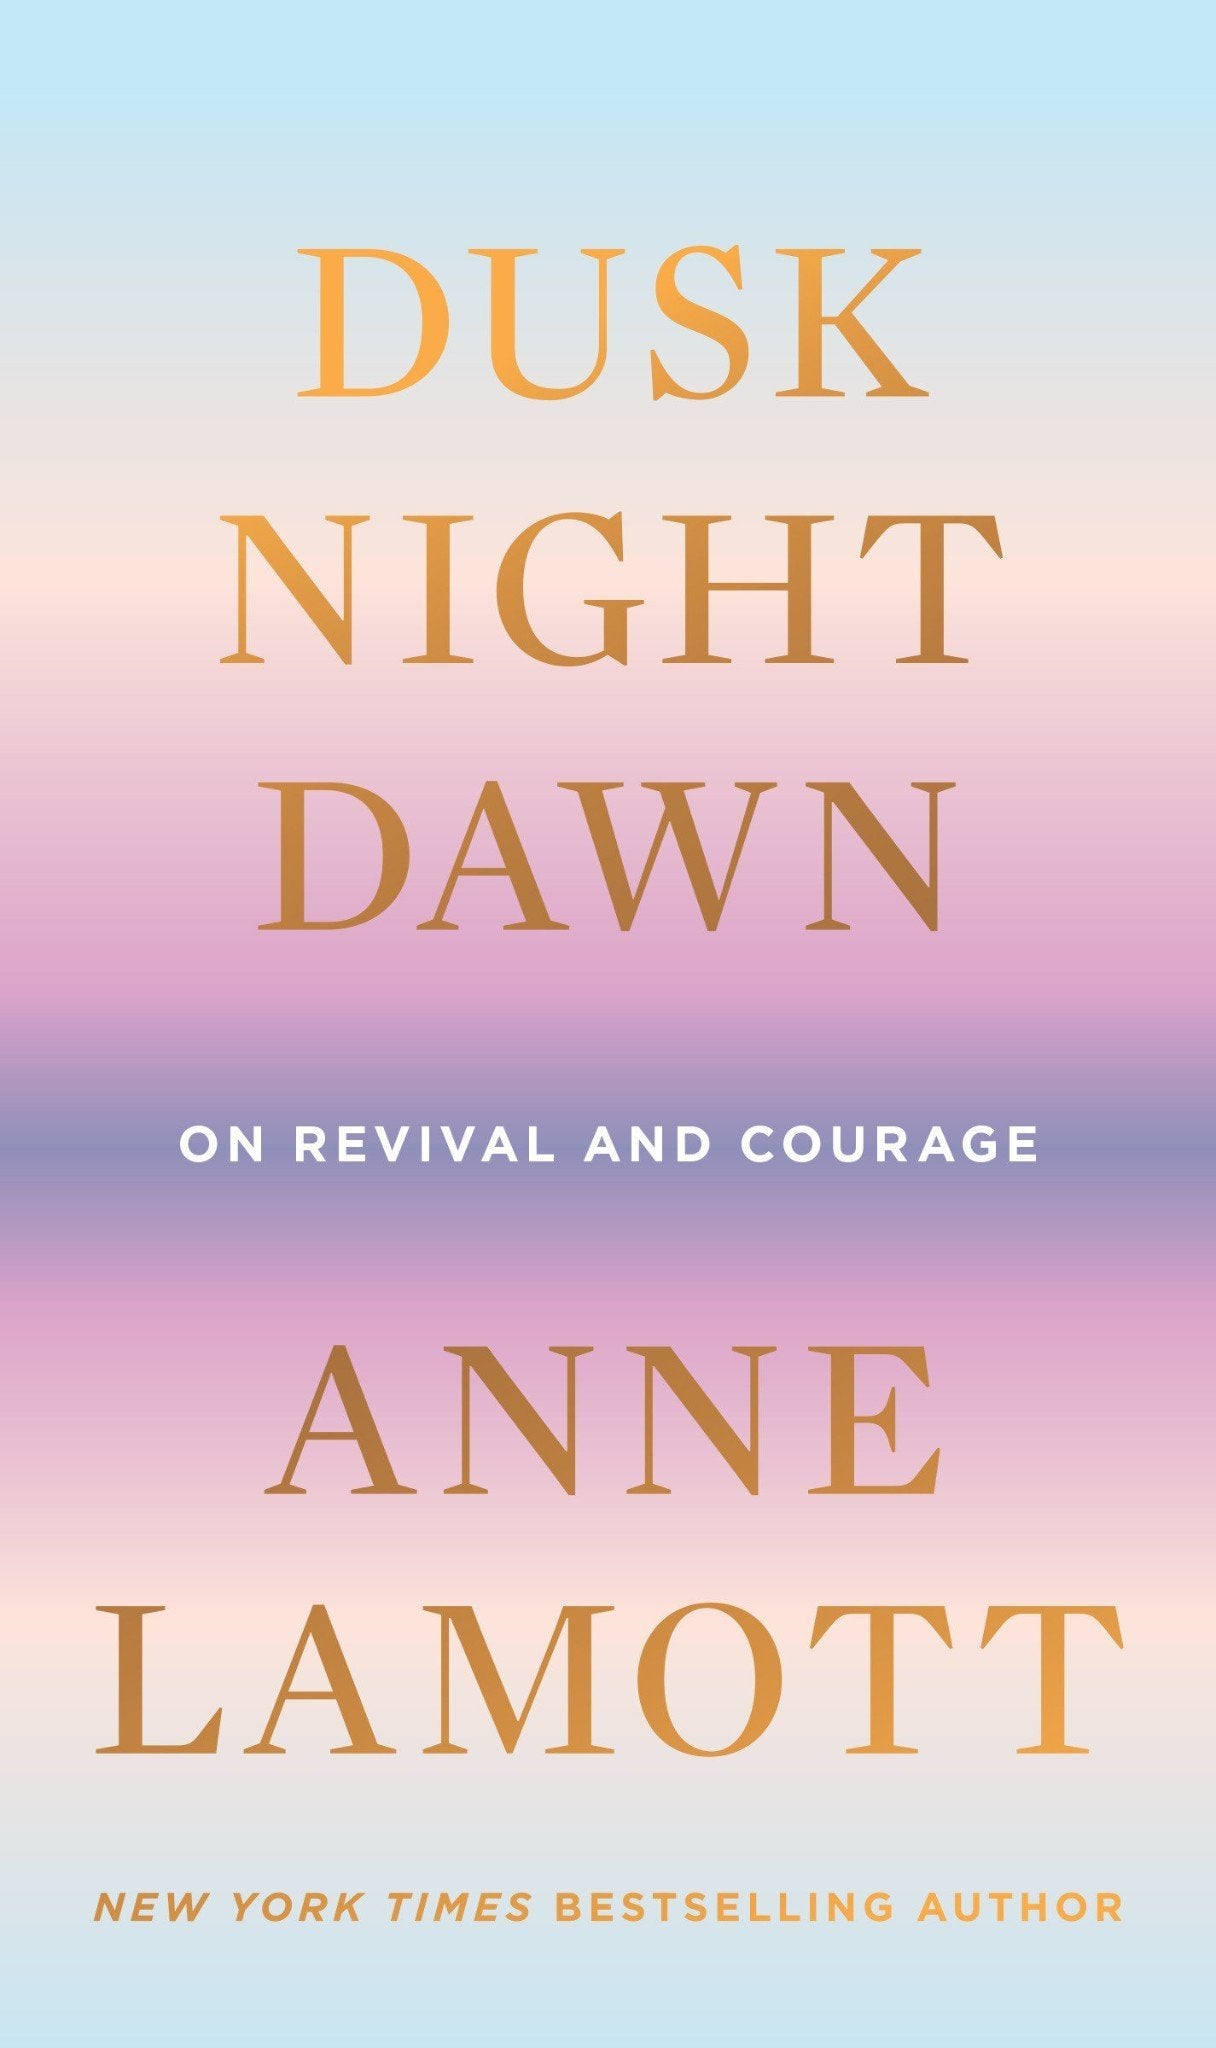 Dusk, Night, Dawn: On Revival and Courage by Anne Lamott (Hardcover) - LV'S Global Media